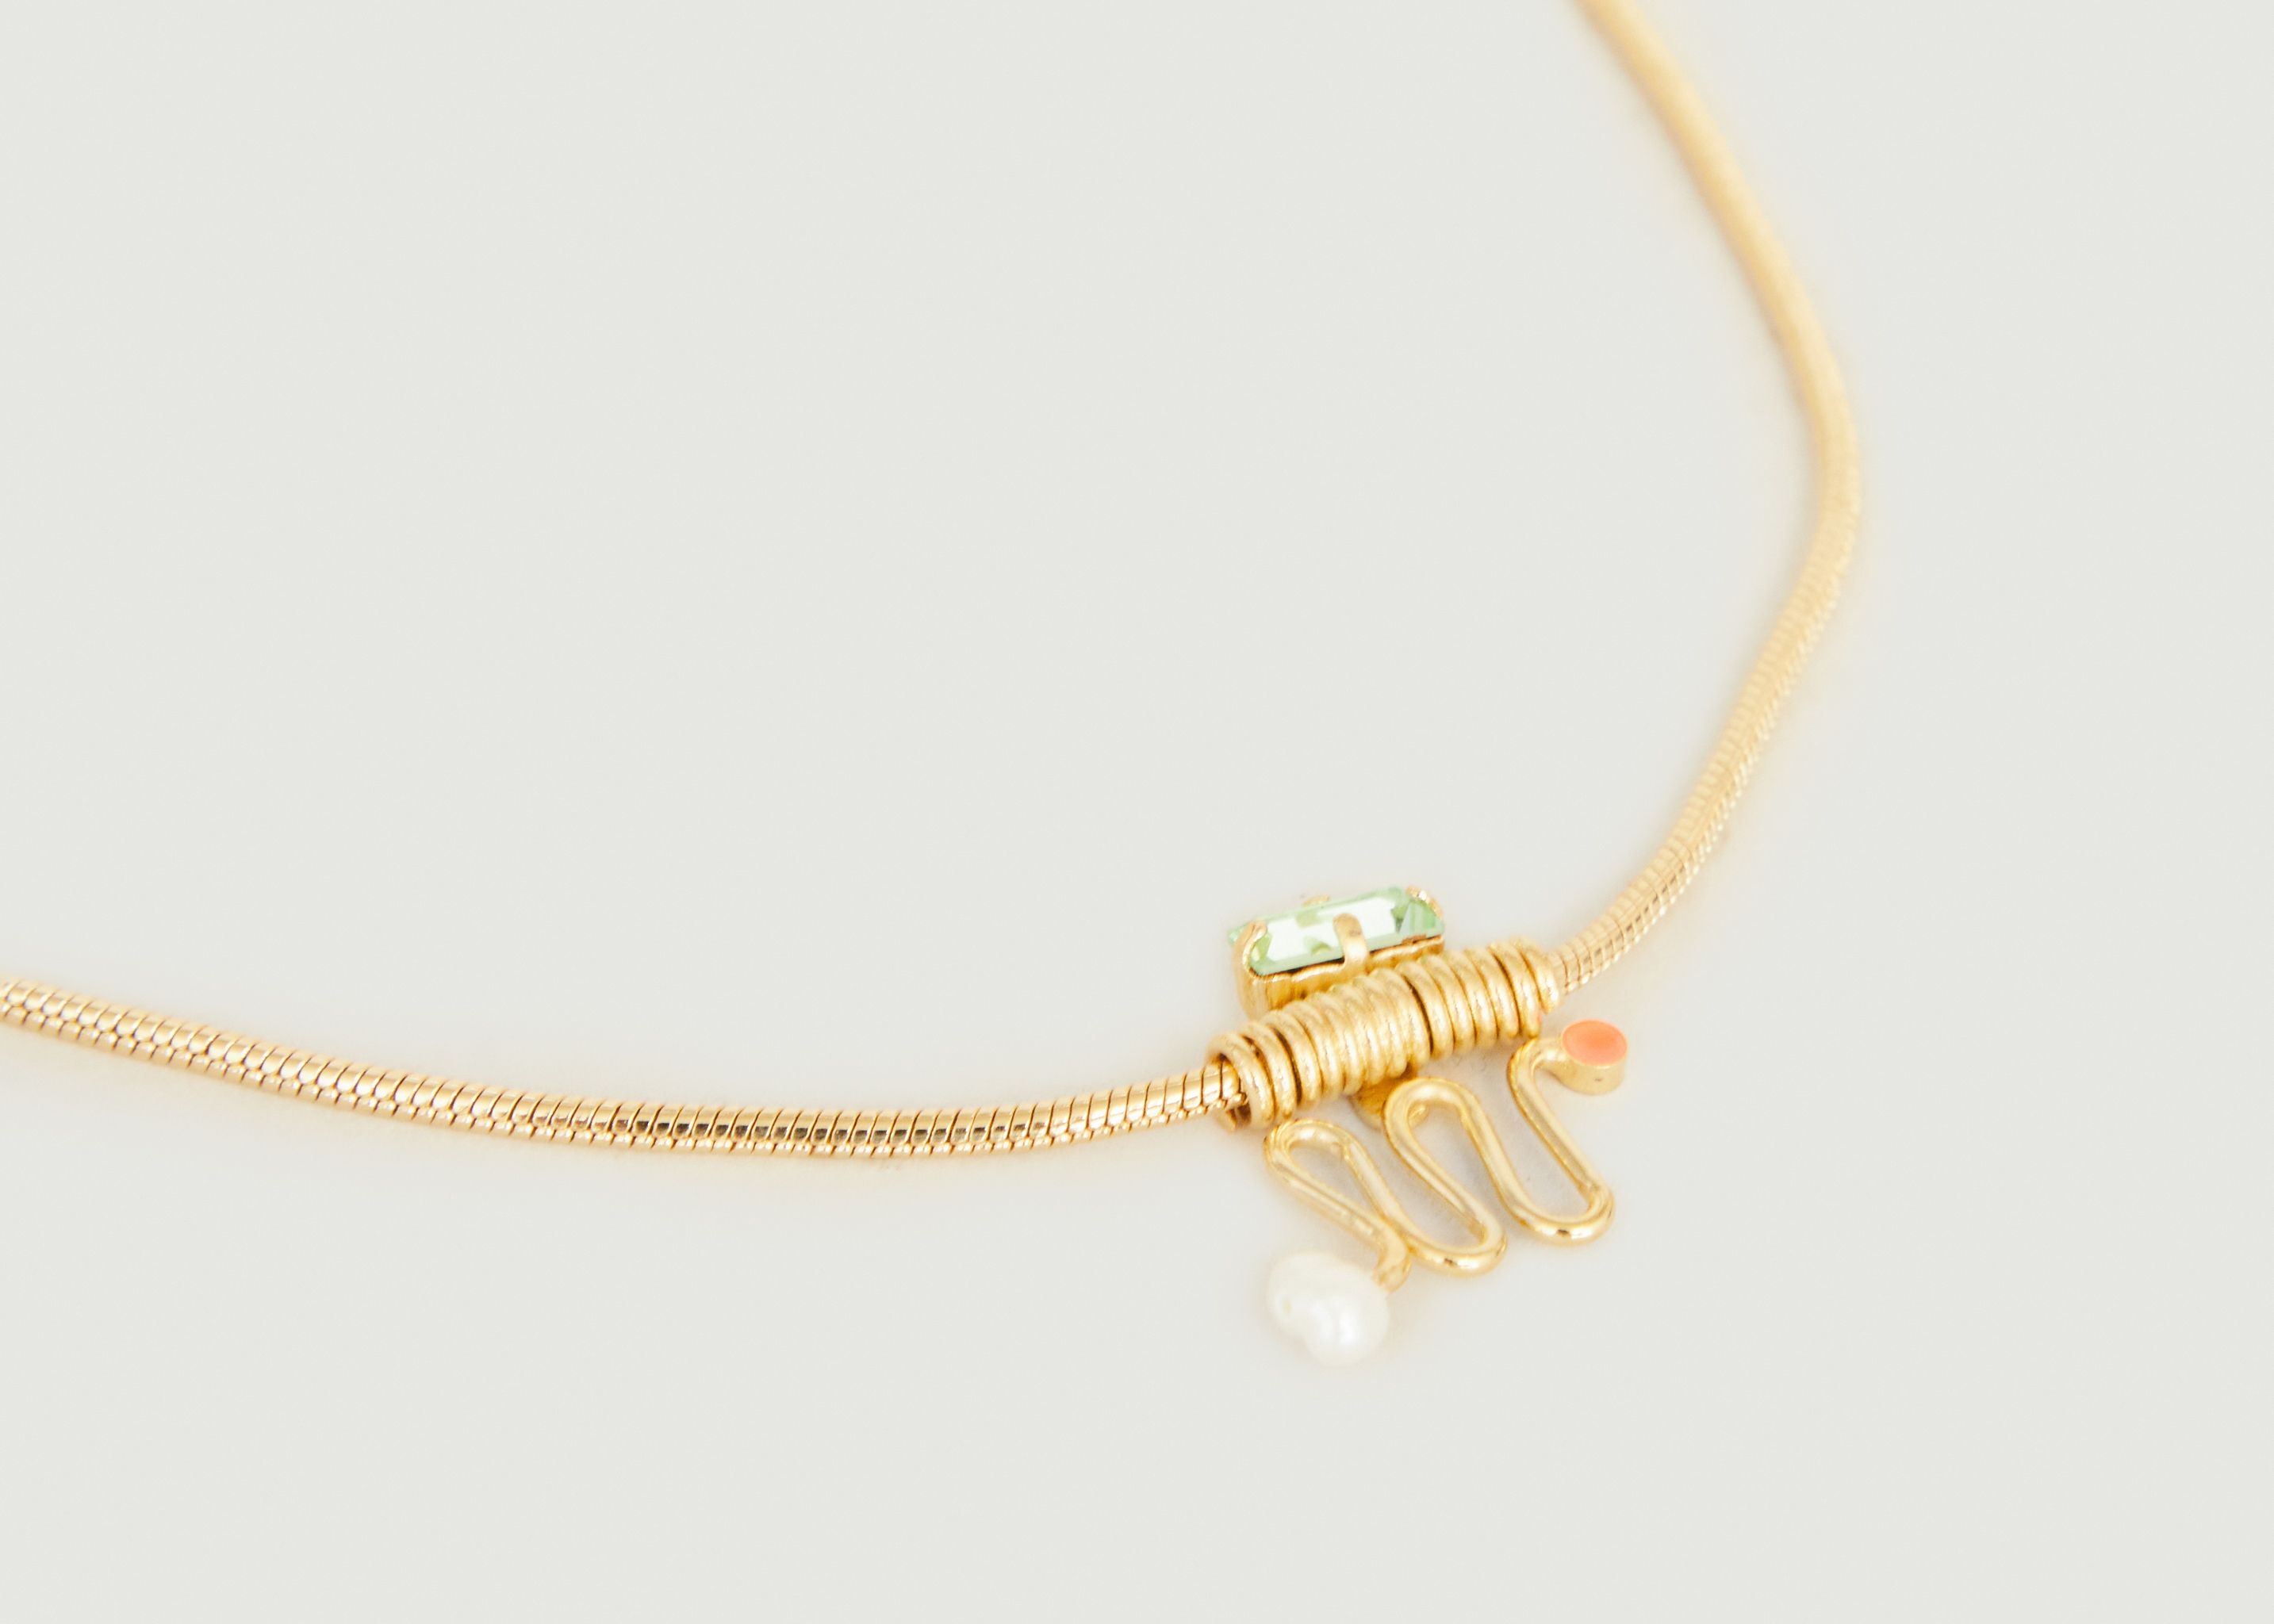 Ettore Totem necklace in 24K gold-plated brass - Judith Benita